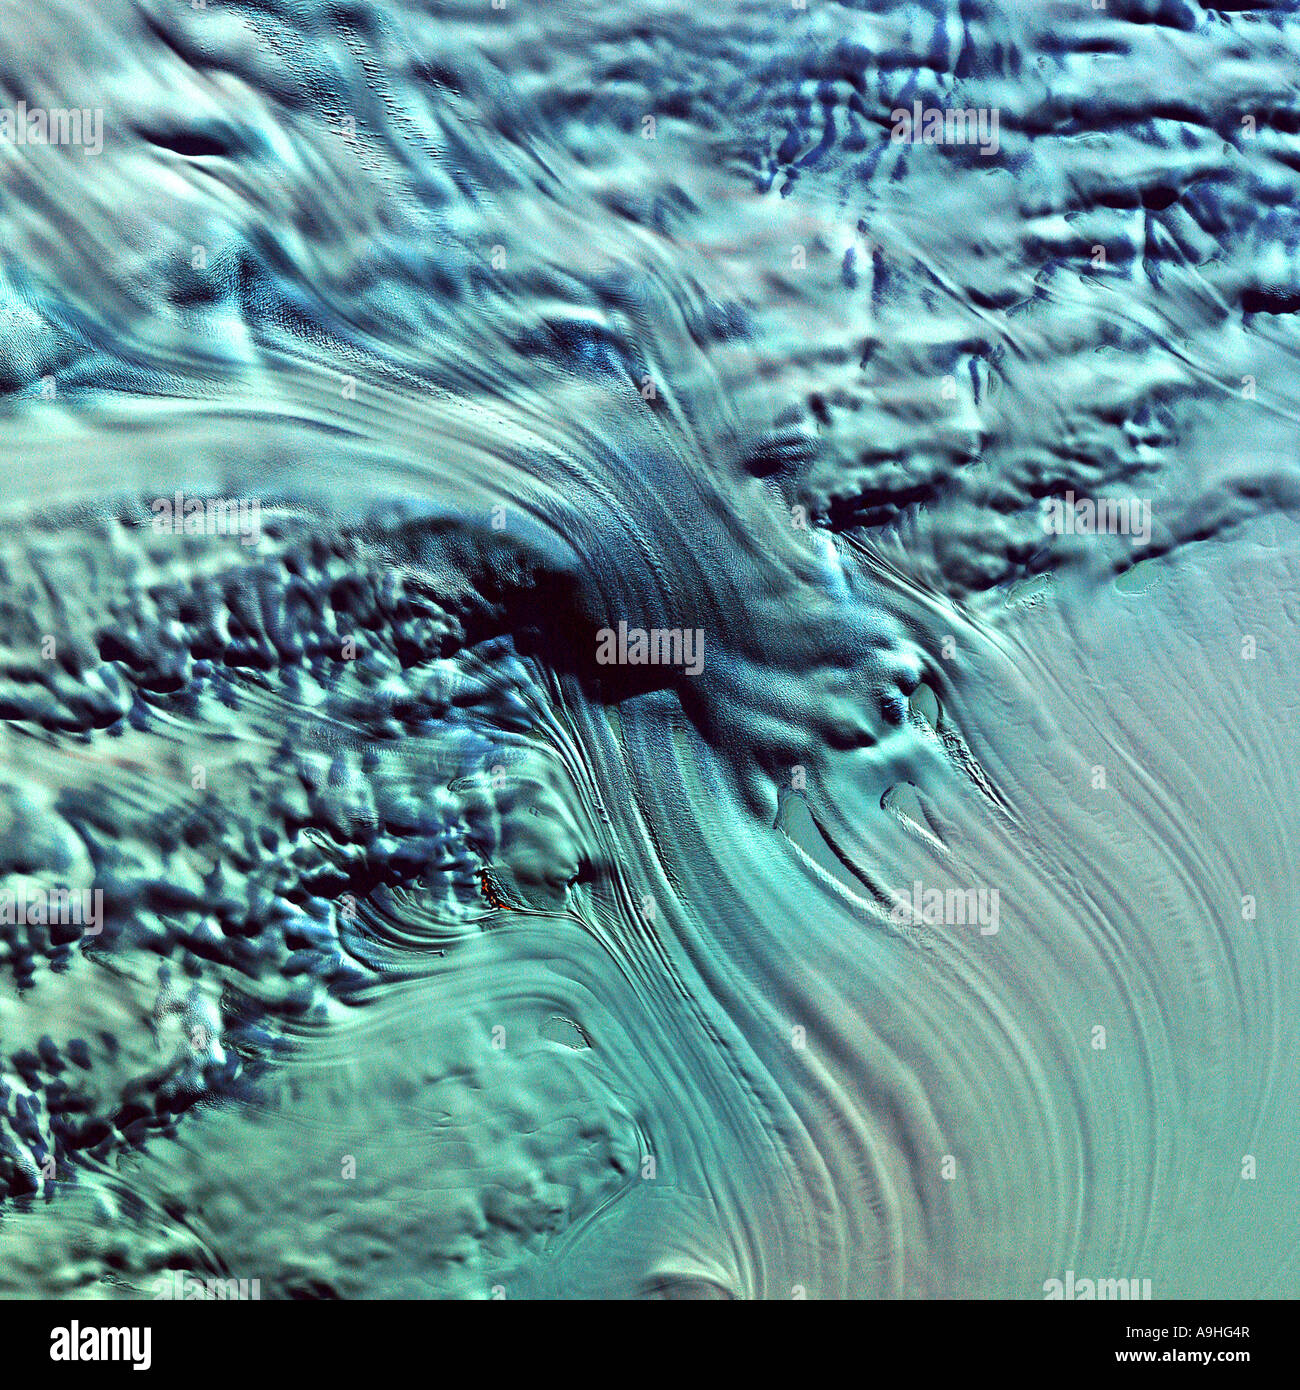 The Lambert Glacier in Antarctica as seen from Space Stock Photo